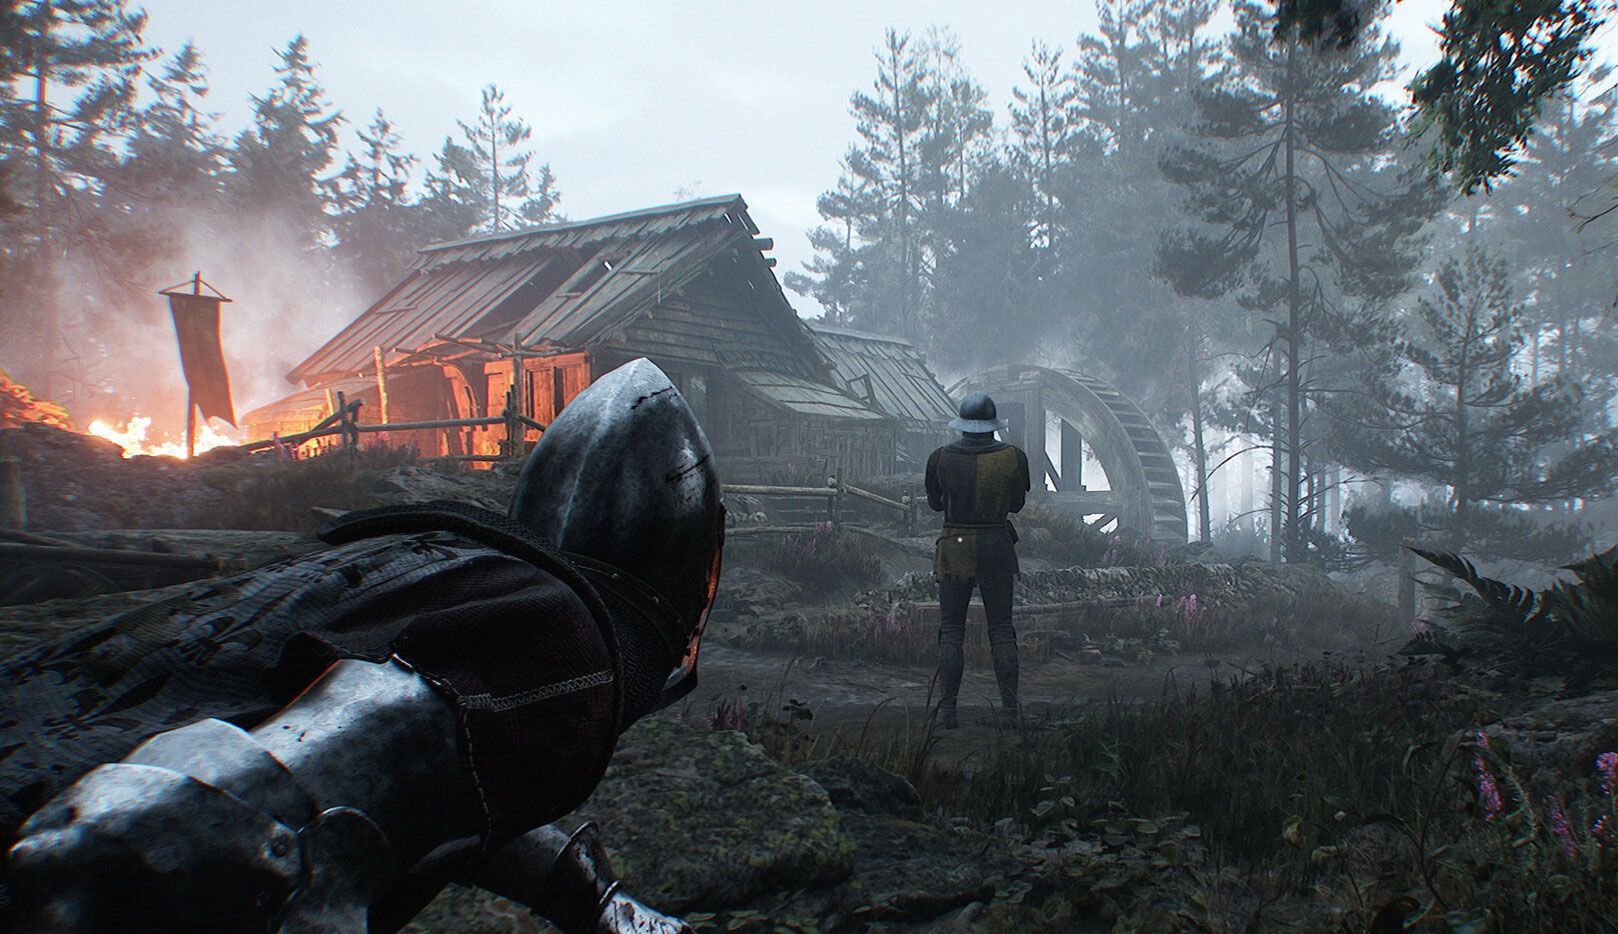 Blight: Survival, Release Date, Survial PVE Game, Coop, Medieval-Themed Games, NoobFeed